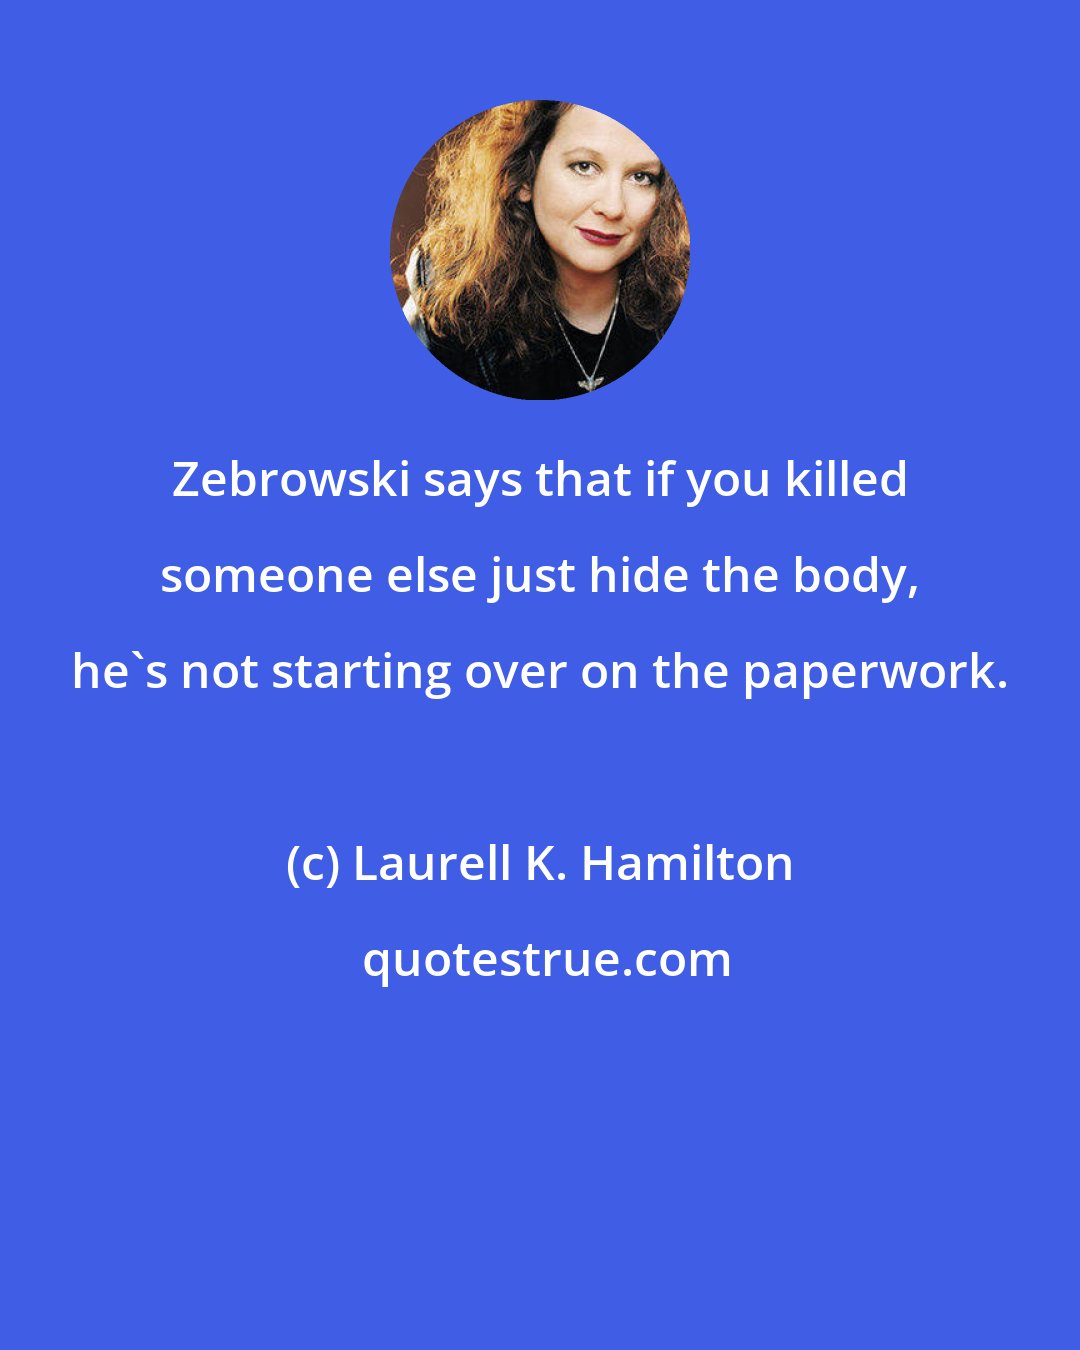 Laurell K. Hamilton: Zebrowski says that if you killed someone else just hide the body, he's not starting over on the paperwork.